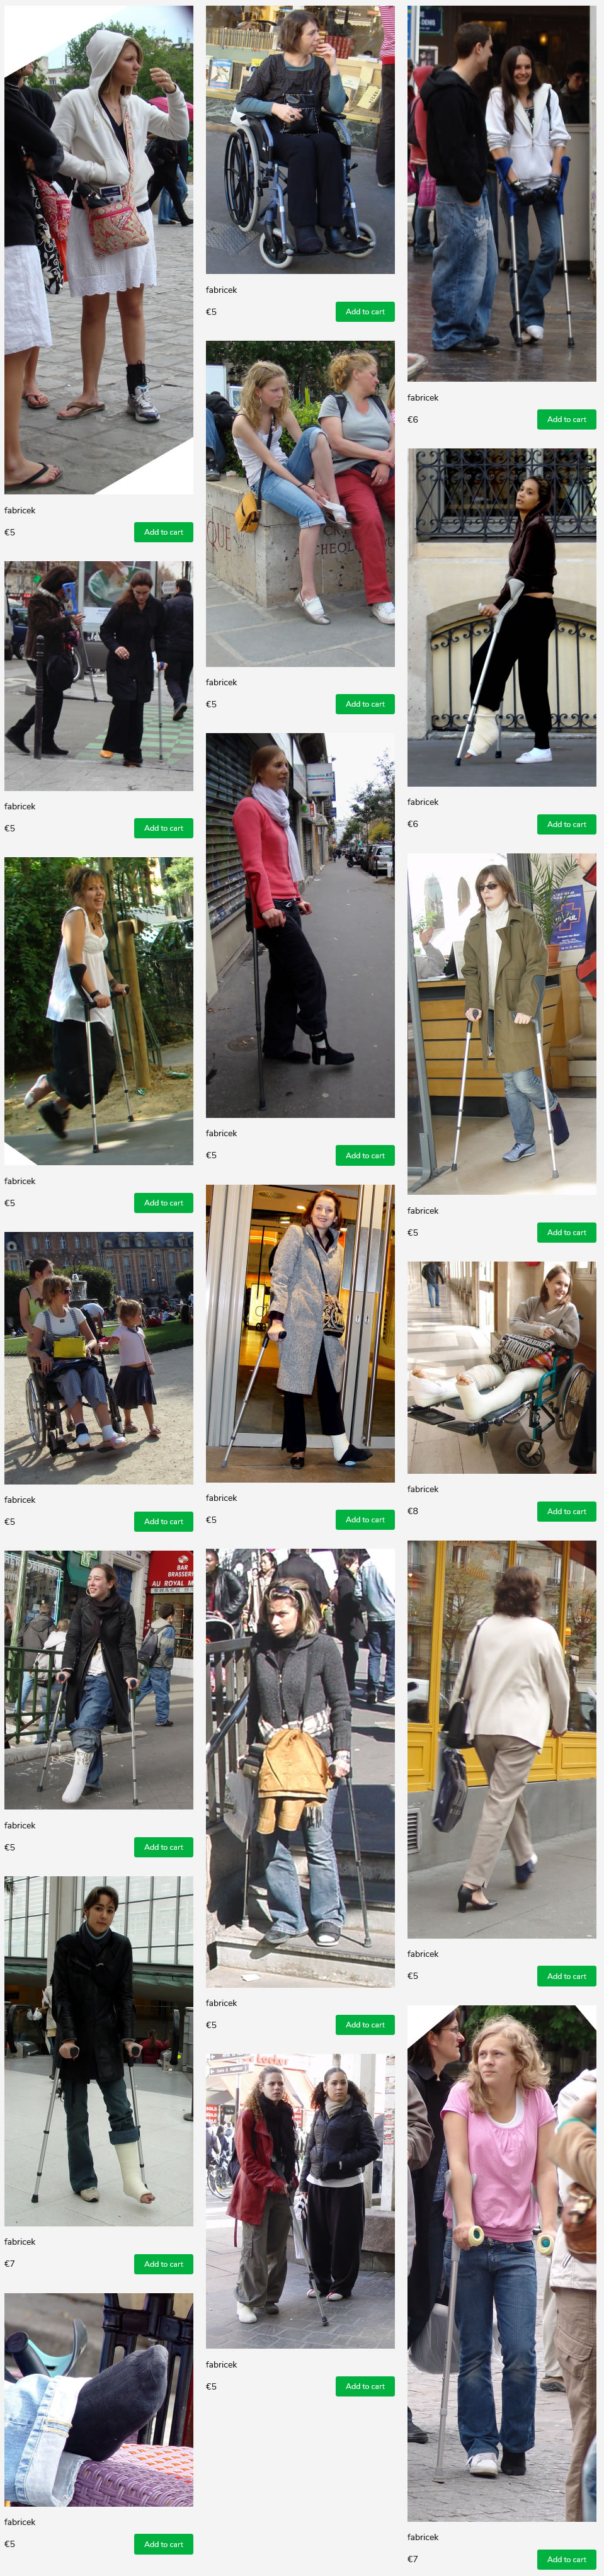 19 sets of french girls and women in all kinds of orthopedic treatments: casts, bandages, braces - moving on crutches and in wheelchairs. some with multiple limbs immobilized.